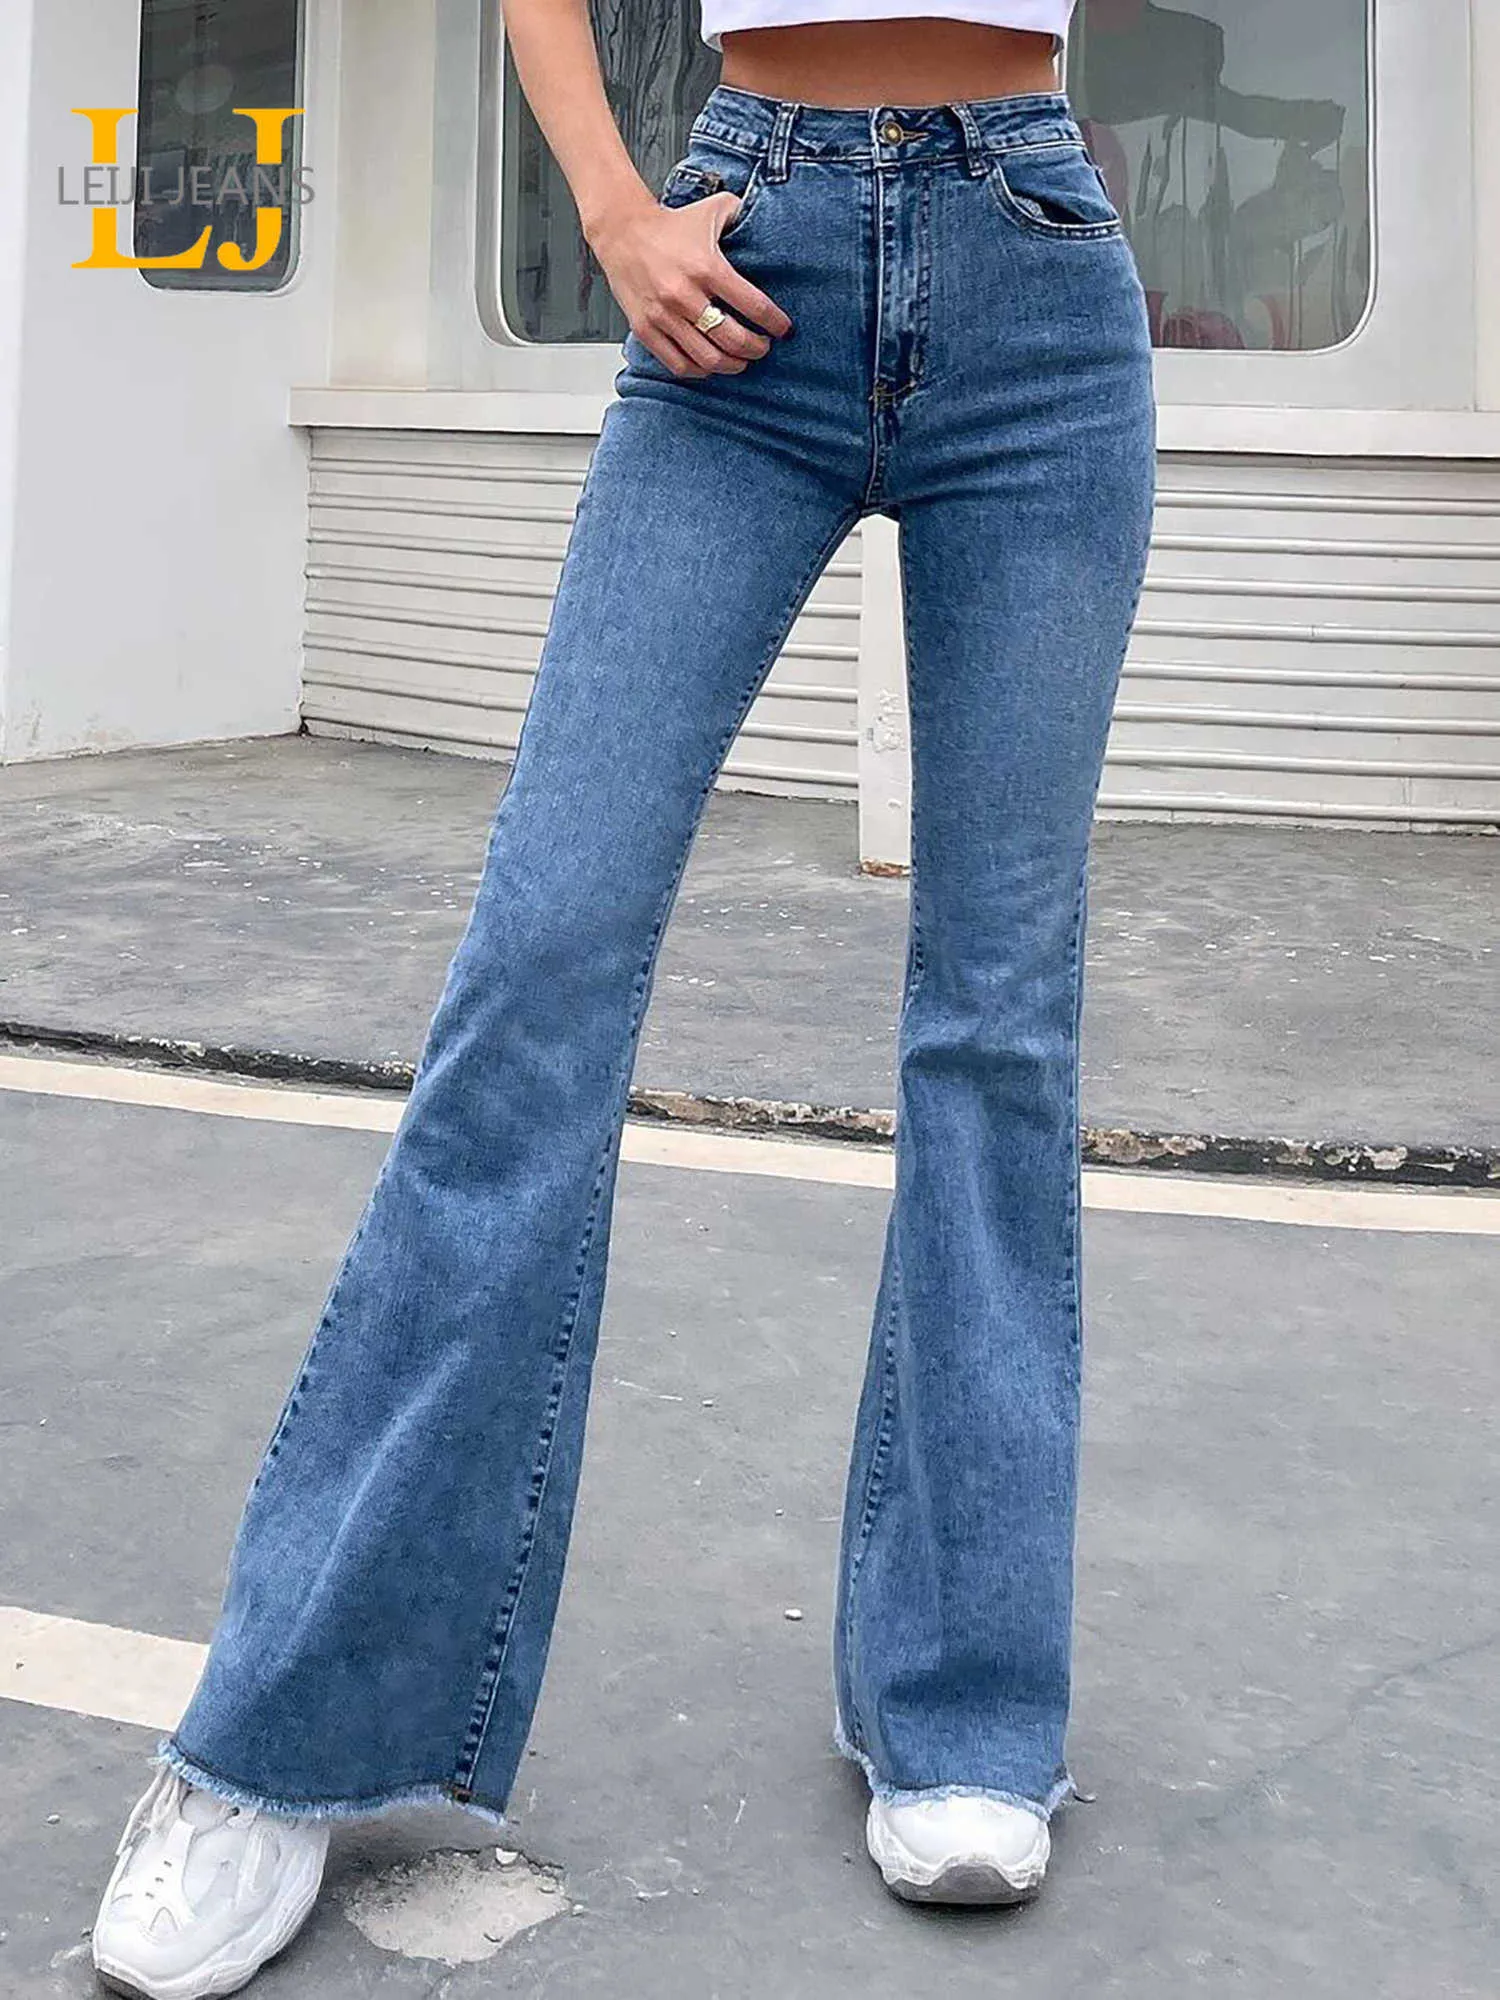 Stretchy High Waist Flared Flared Jeans For Women For Women Full Length  Tall Fitting Denim Pants 2023 Collection From Yanqin03, $36.28